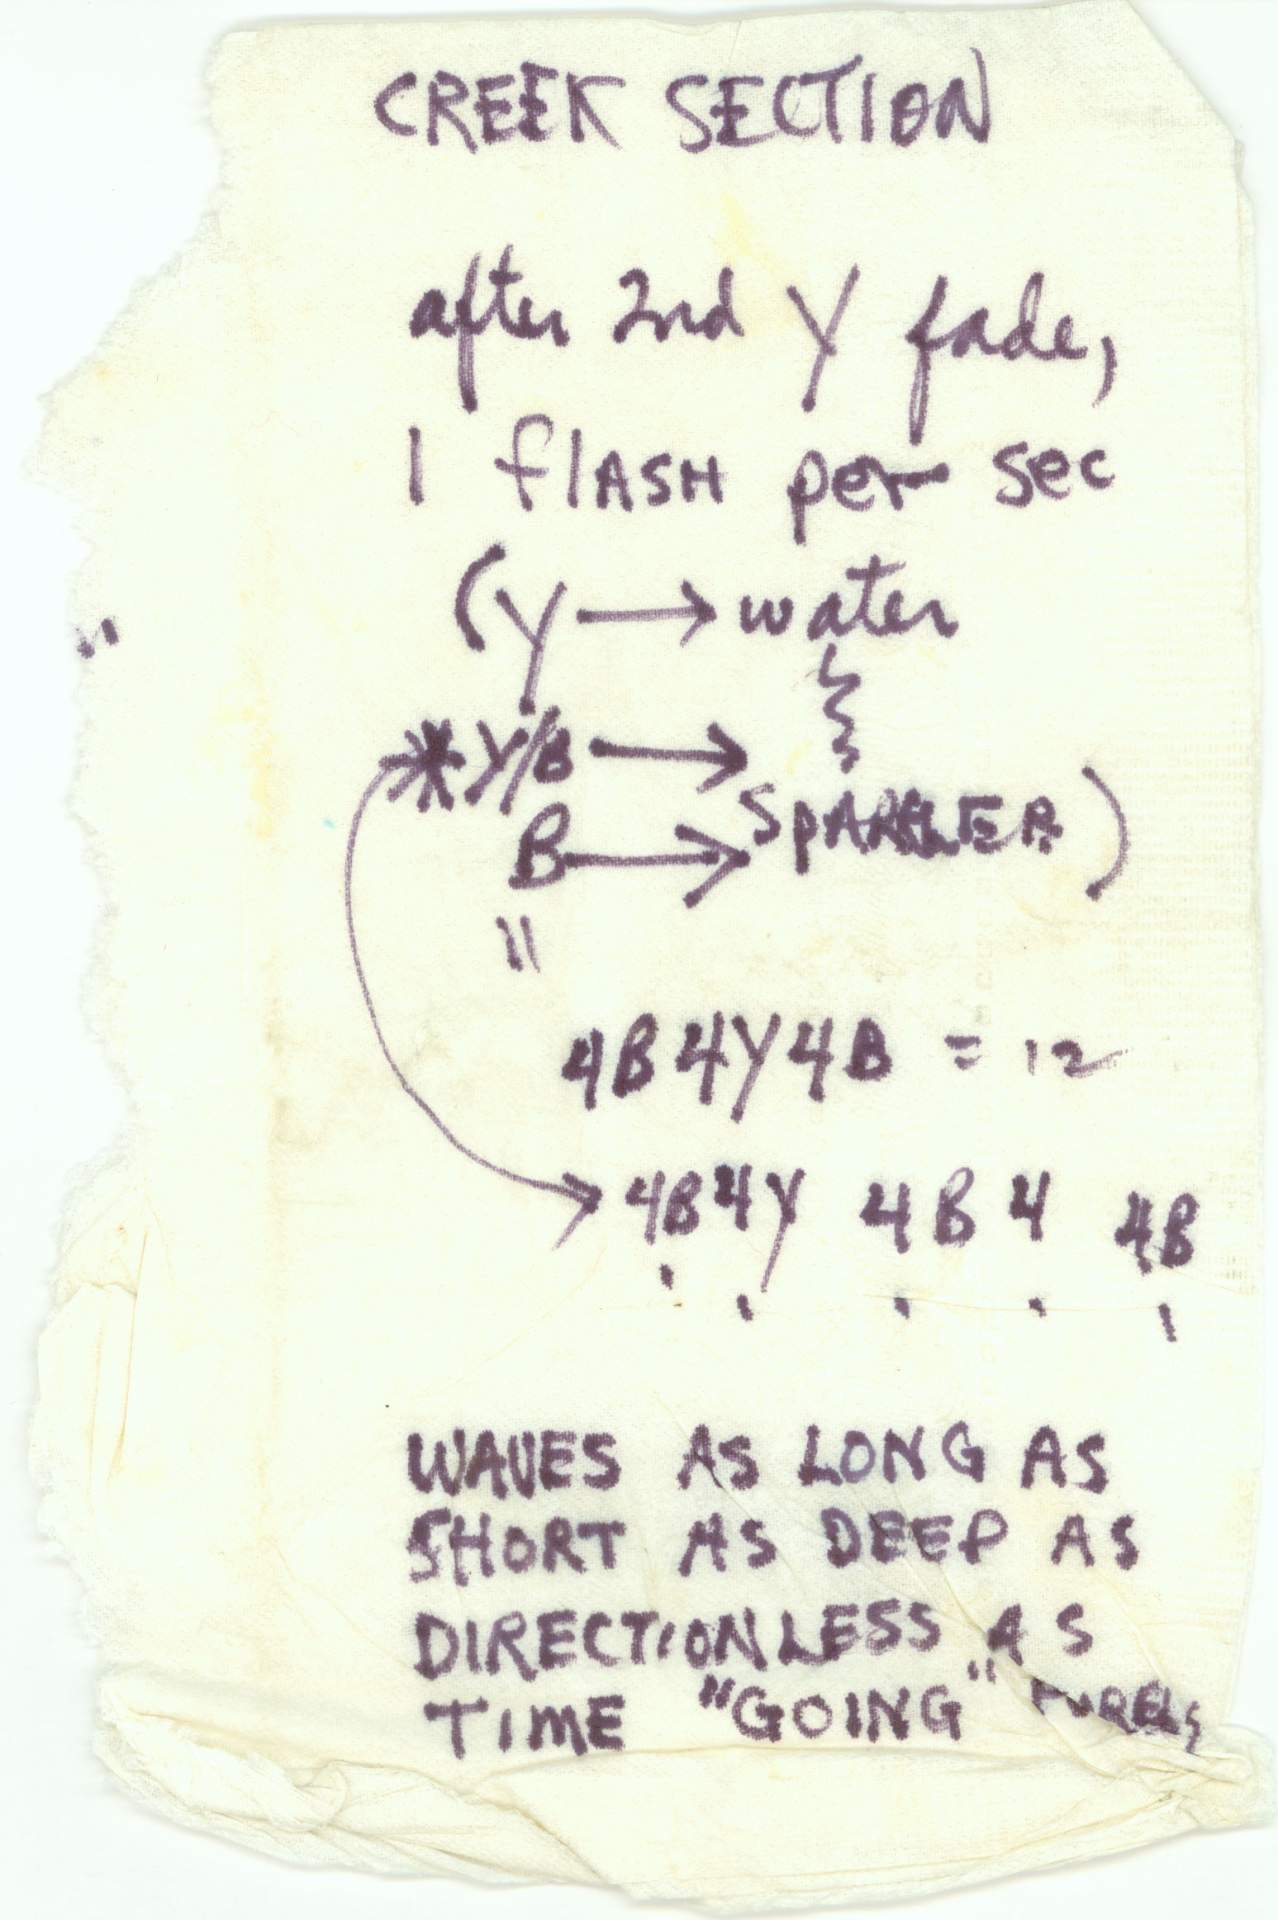 Untitled (notes on a napkin, Creek Section)